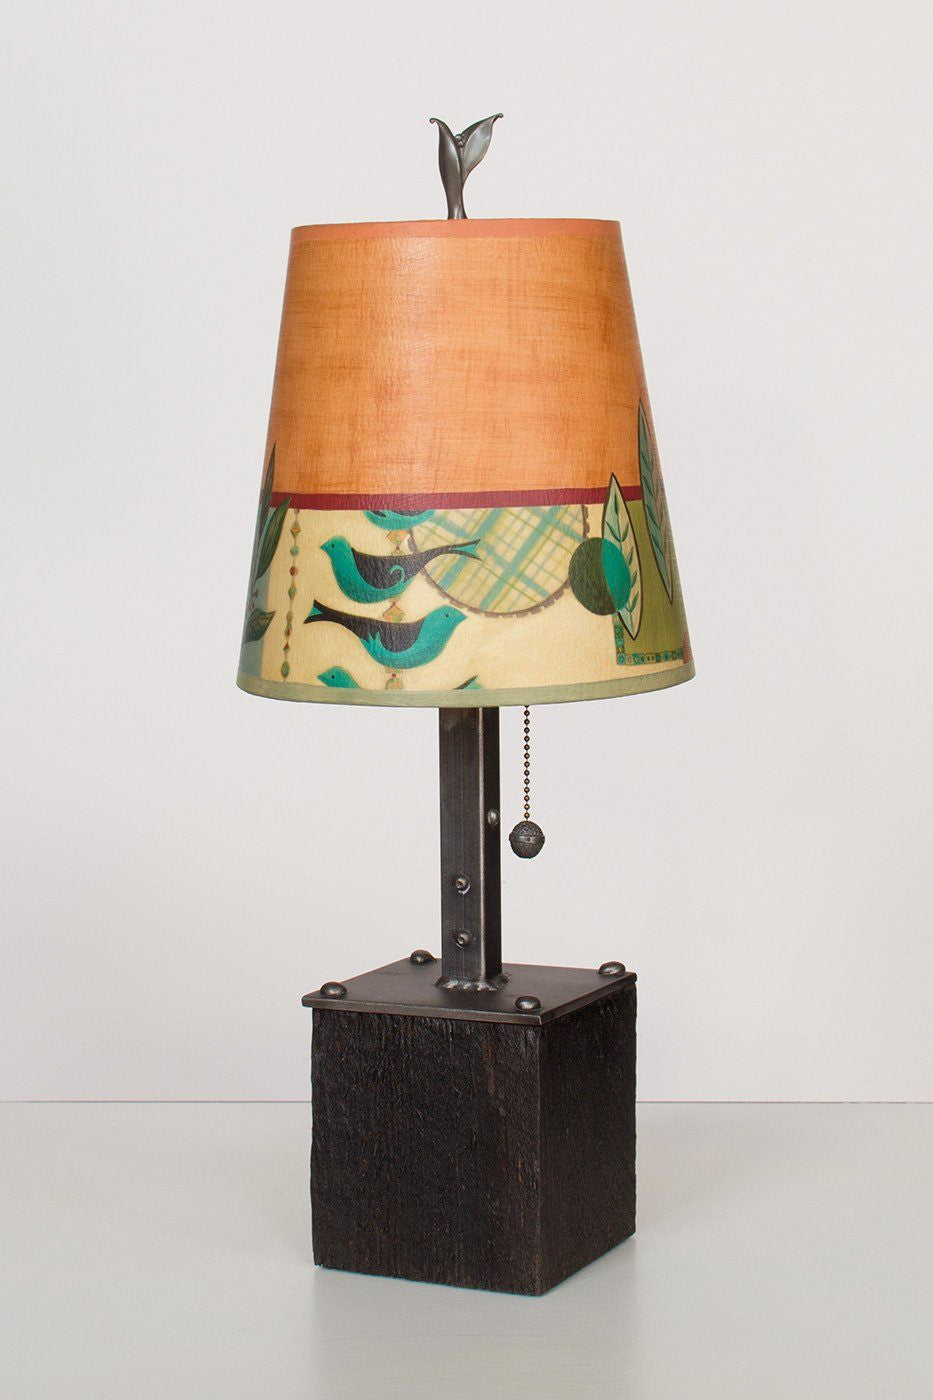 Steel Table Lamp on Reclaimed Wood with Small Drum Shade in New Capri Spice